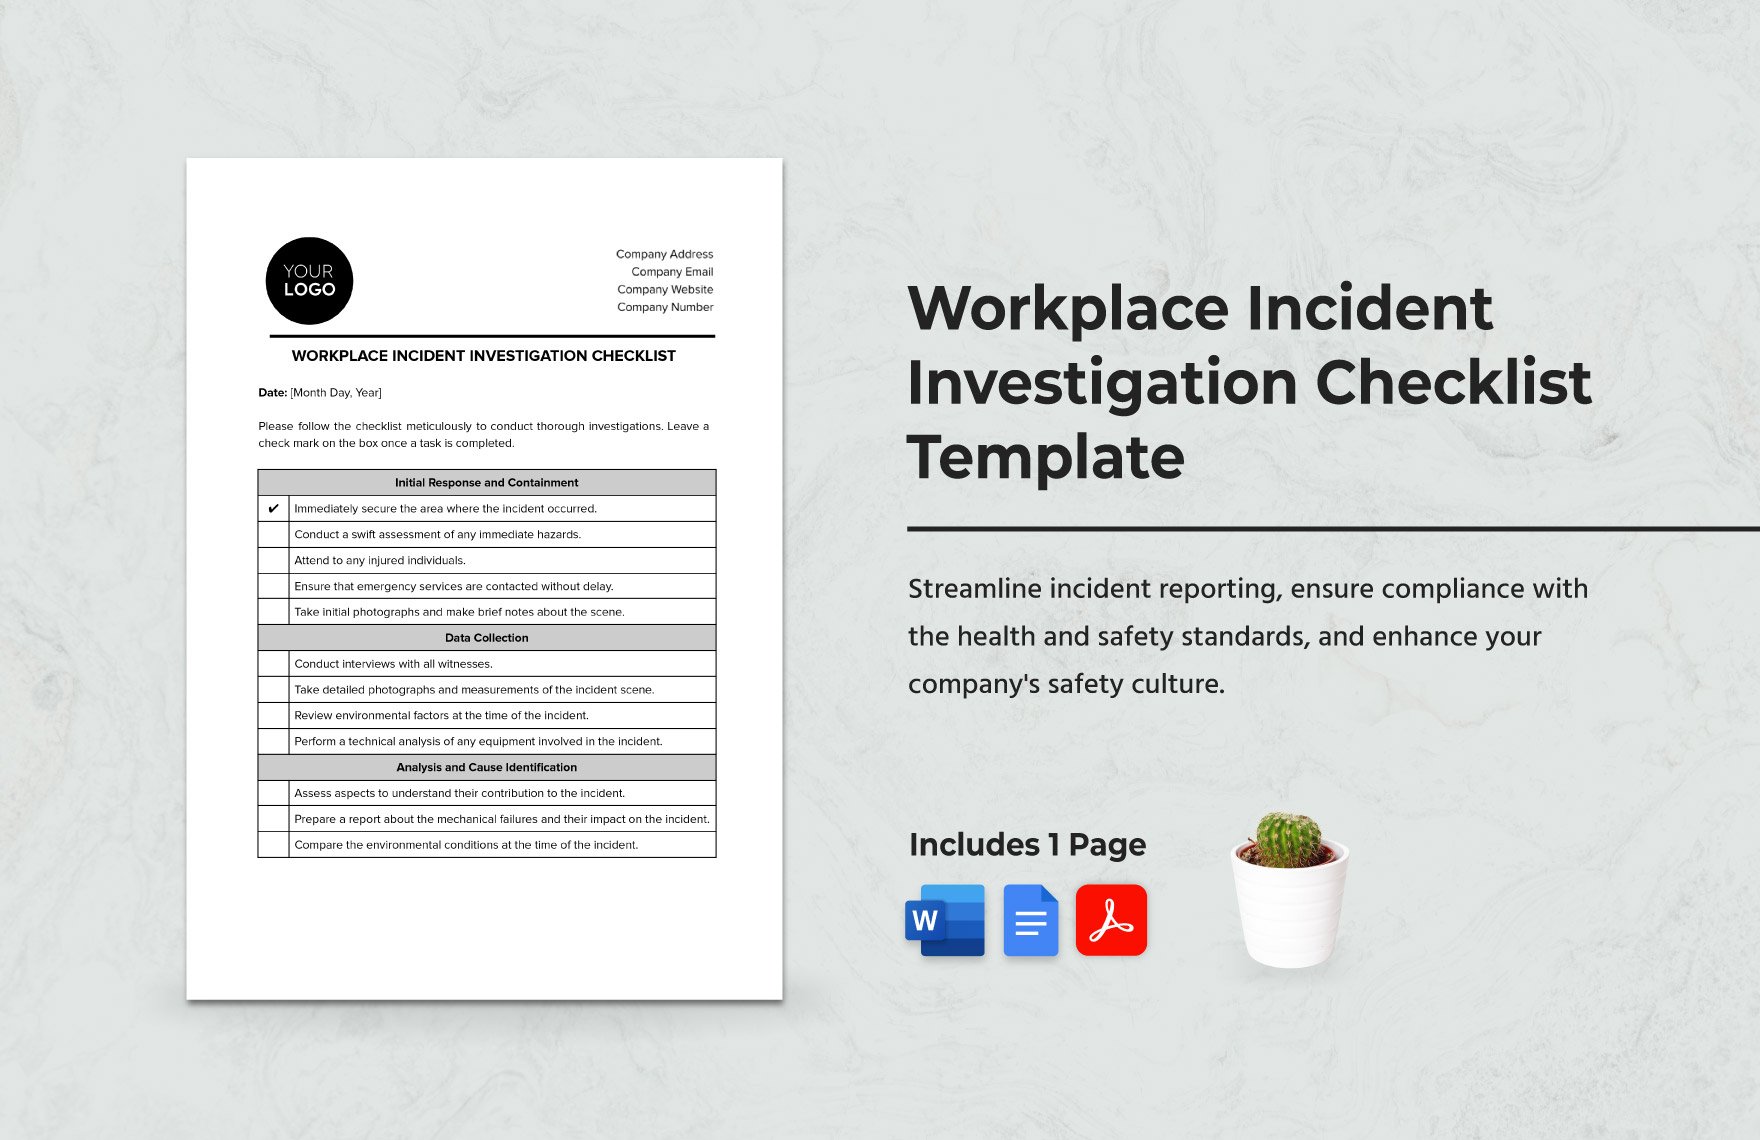 Workplace Incident Investigation Checklist Template in Word, Google Docs, PDF